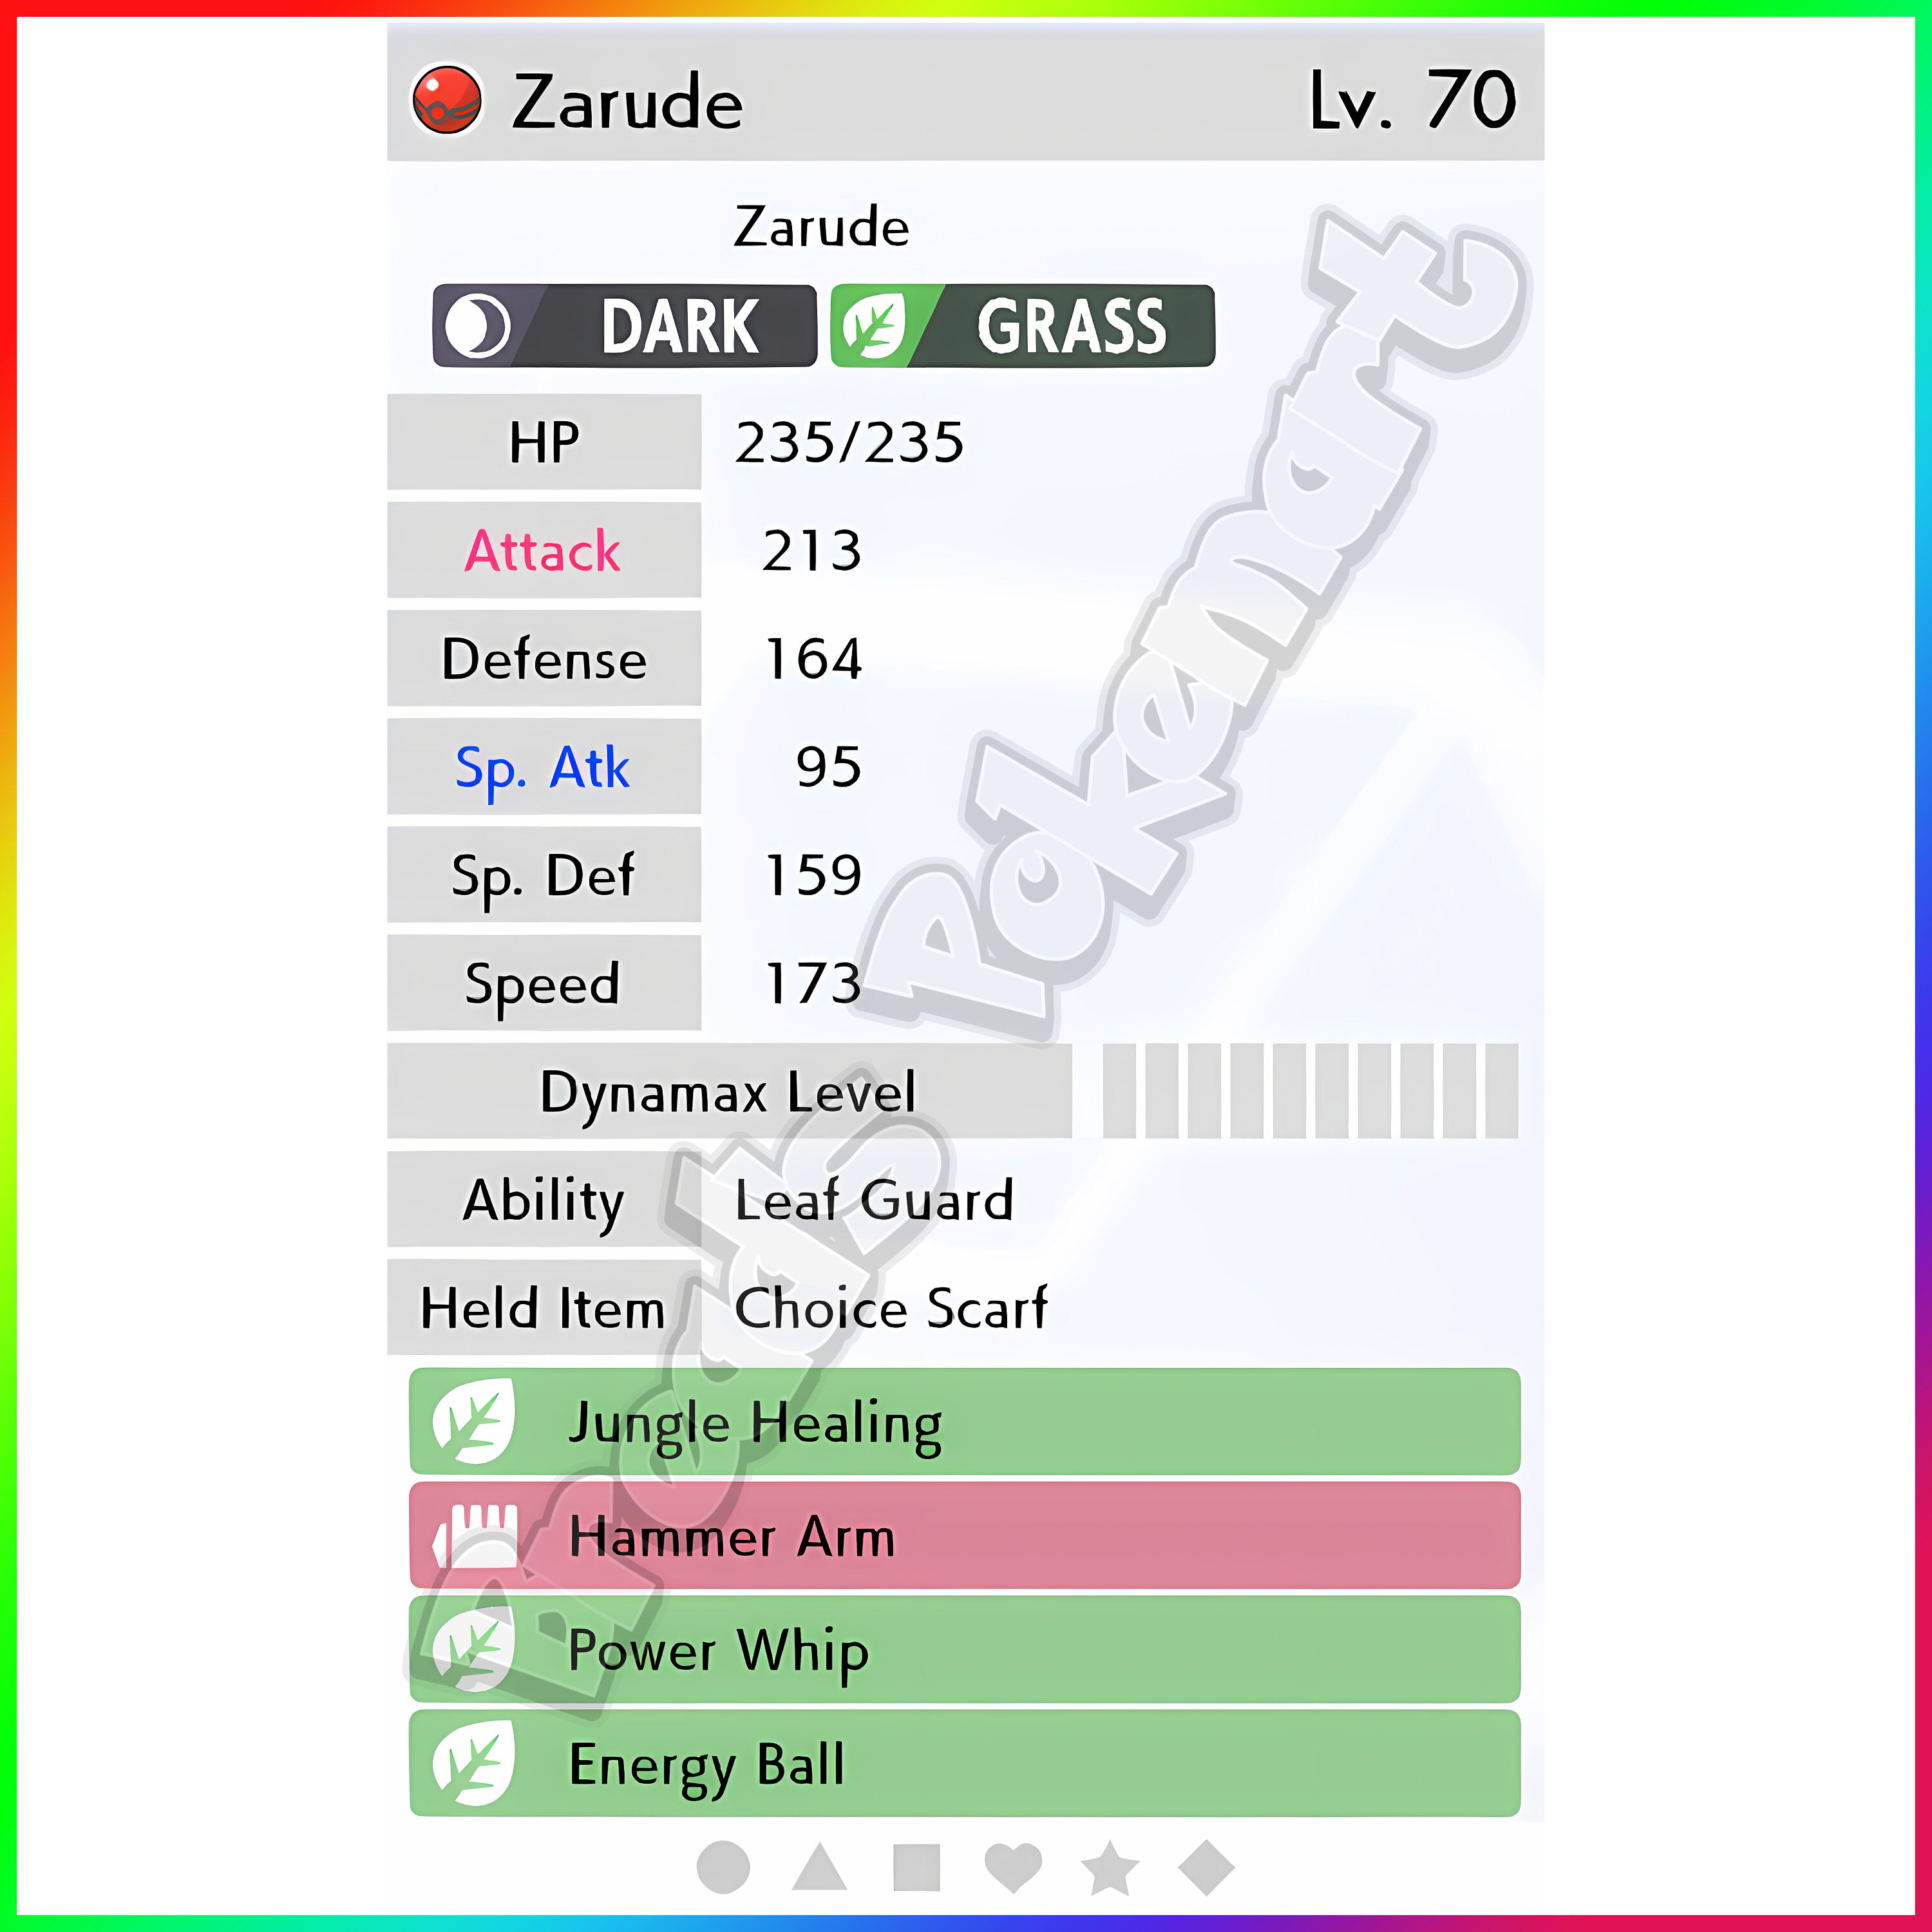 DADA Form Zarude EVENT CONFIRMED Coming To Pokémon Sword And